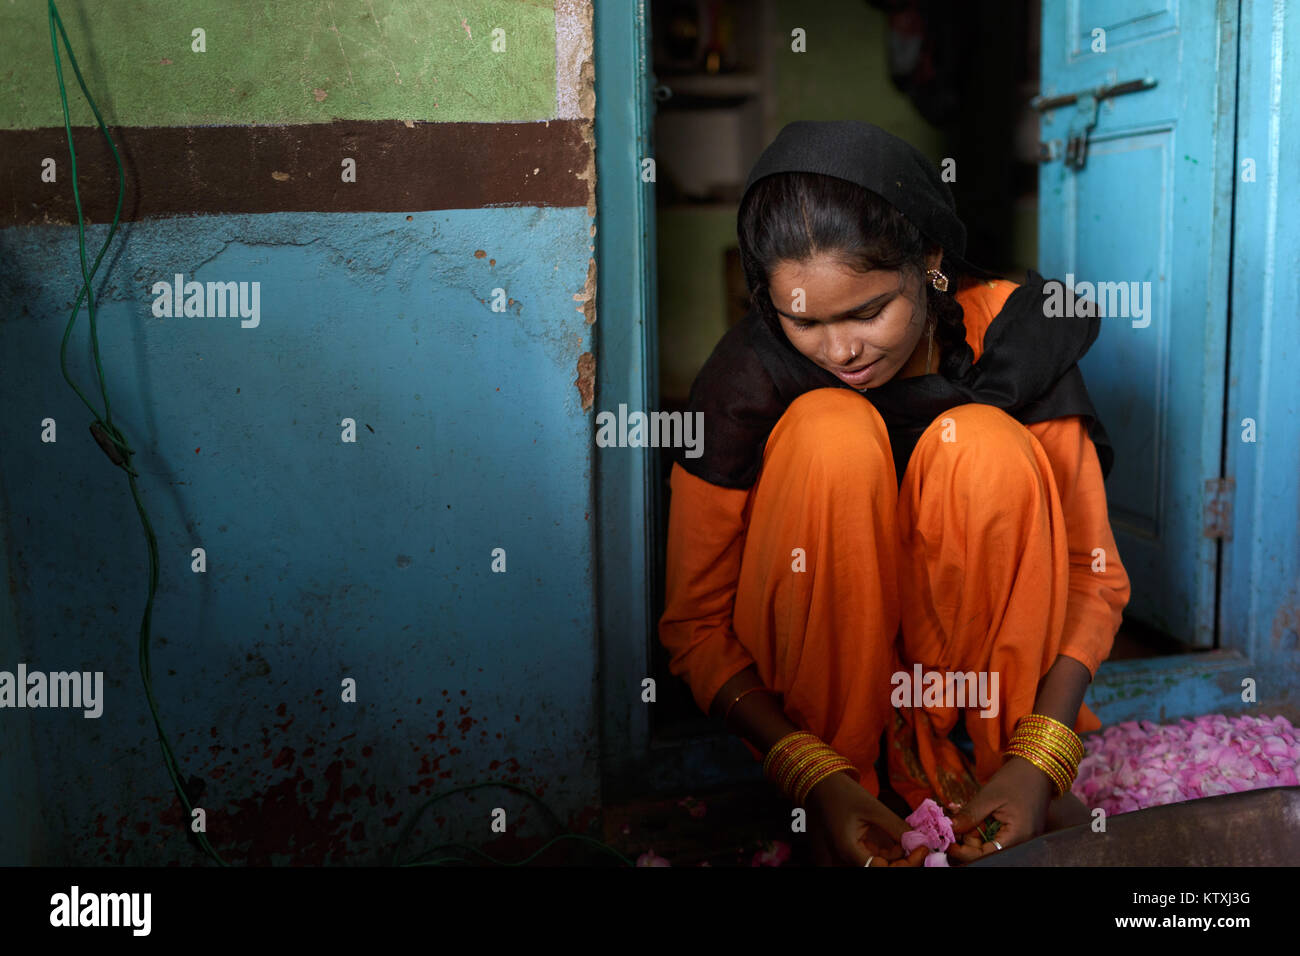 Shy young indian girl in orange traditional dress with hair covered with black shawl picking rose petals in her home, village near Pushkar, Rajasthan. Stock Photo